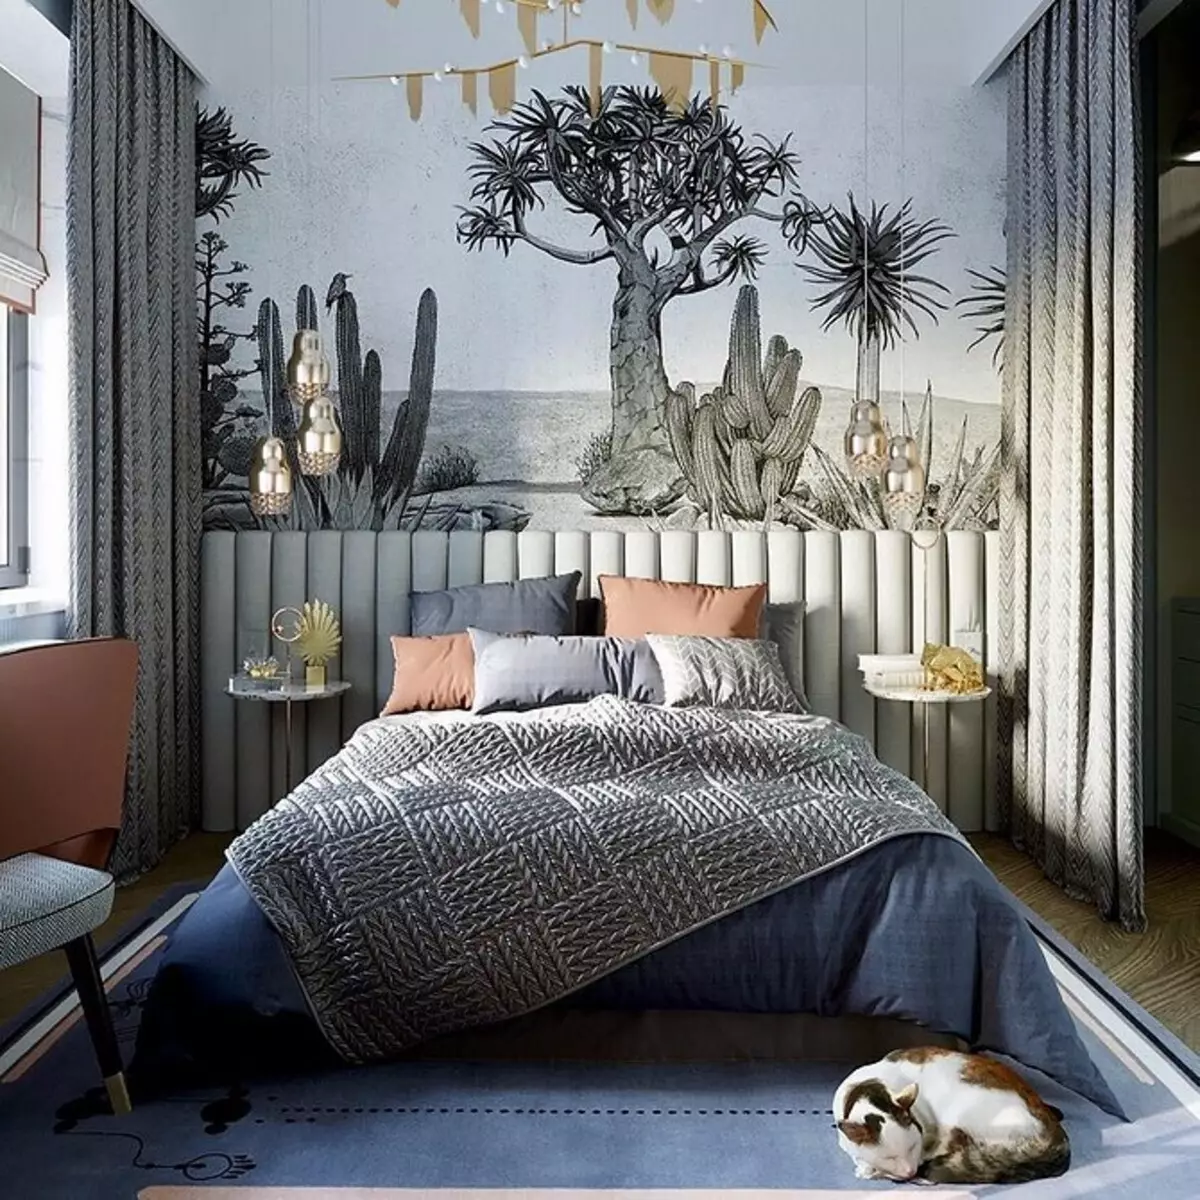 Bedroom Wallpaper Design: Fashion Trends 2020 and Selling Tips 6477_43